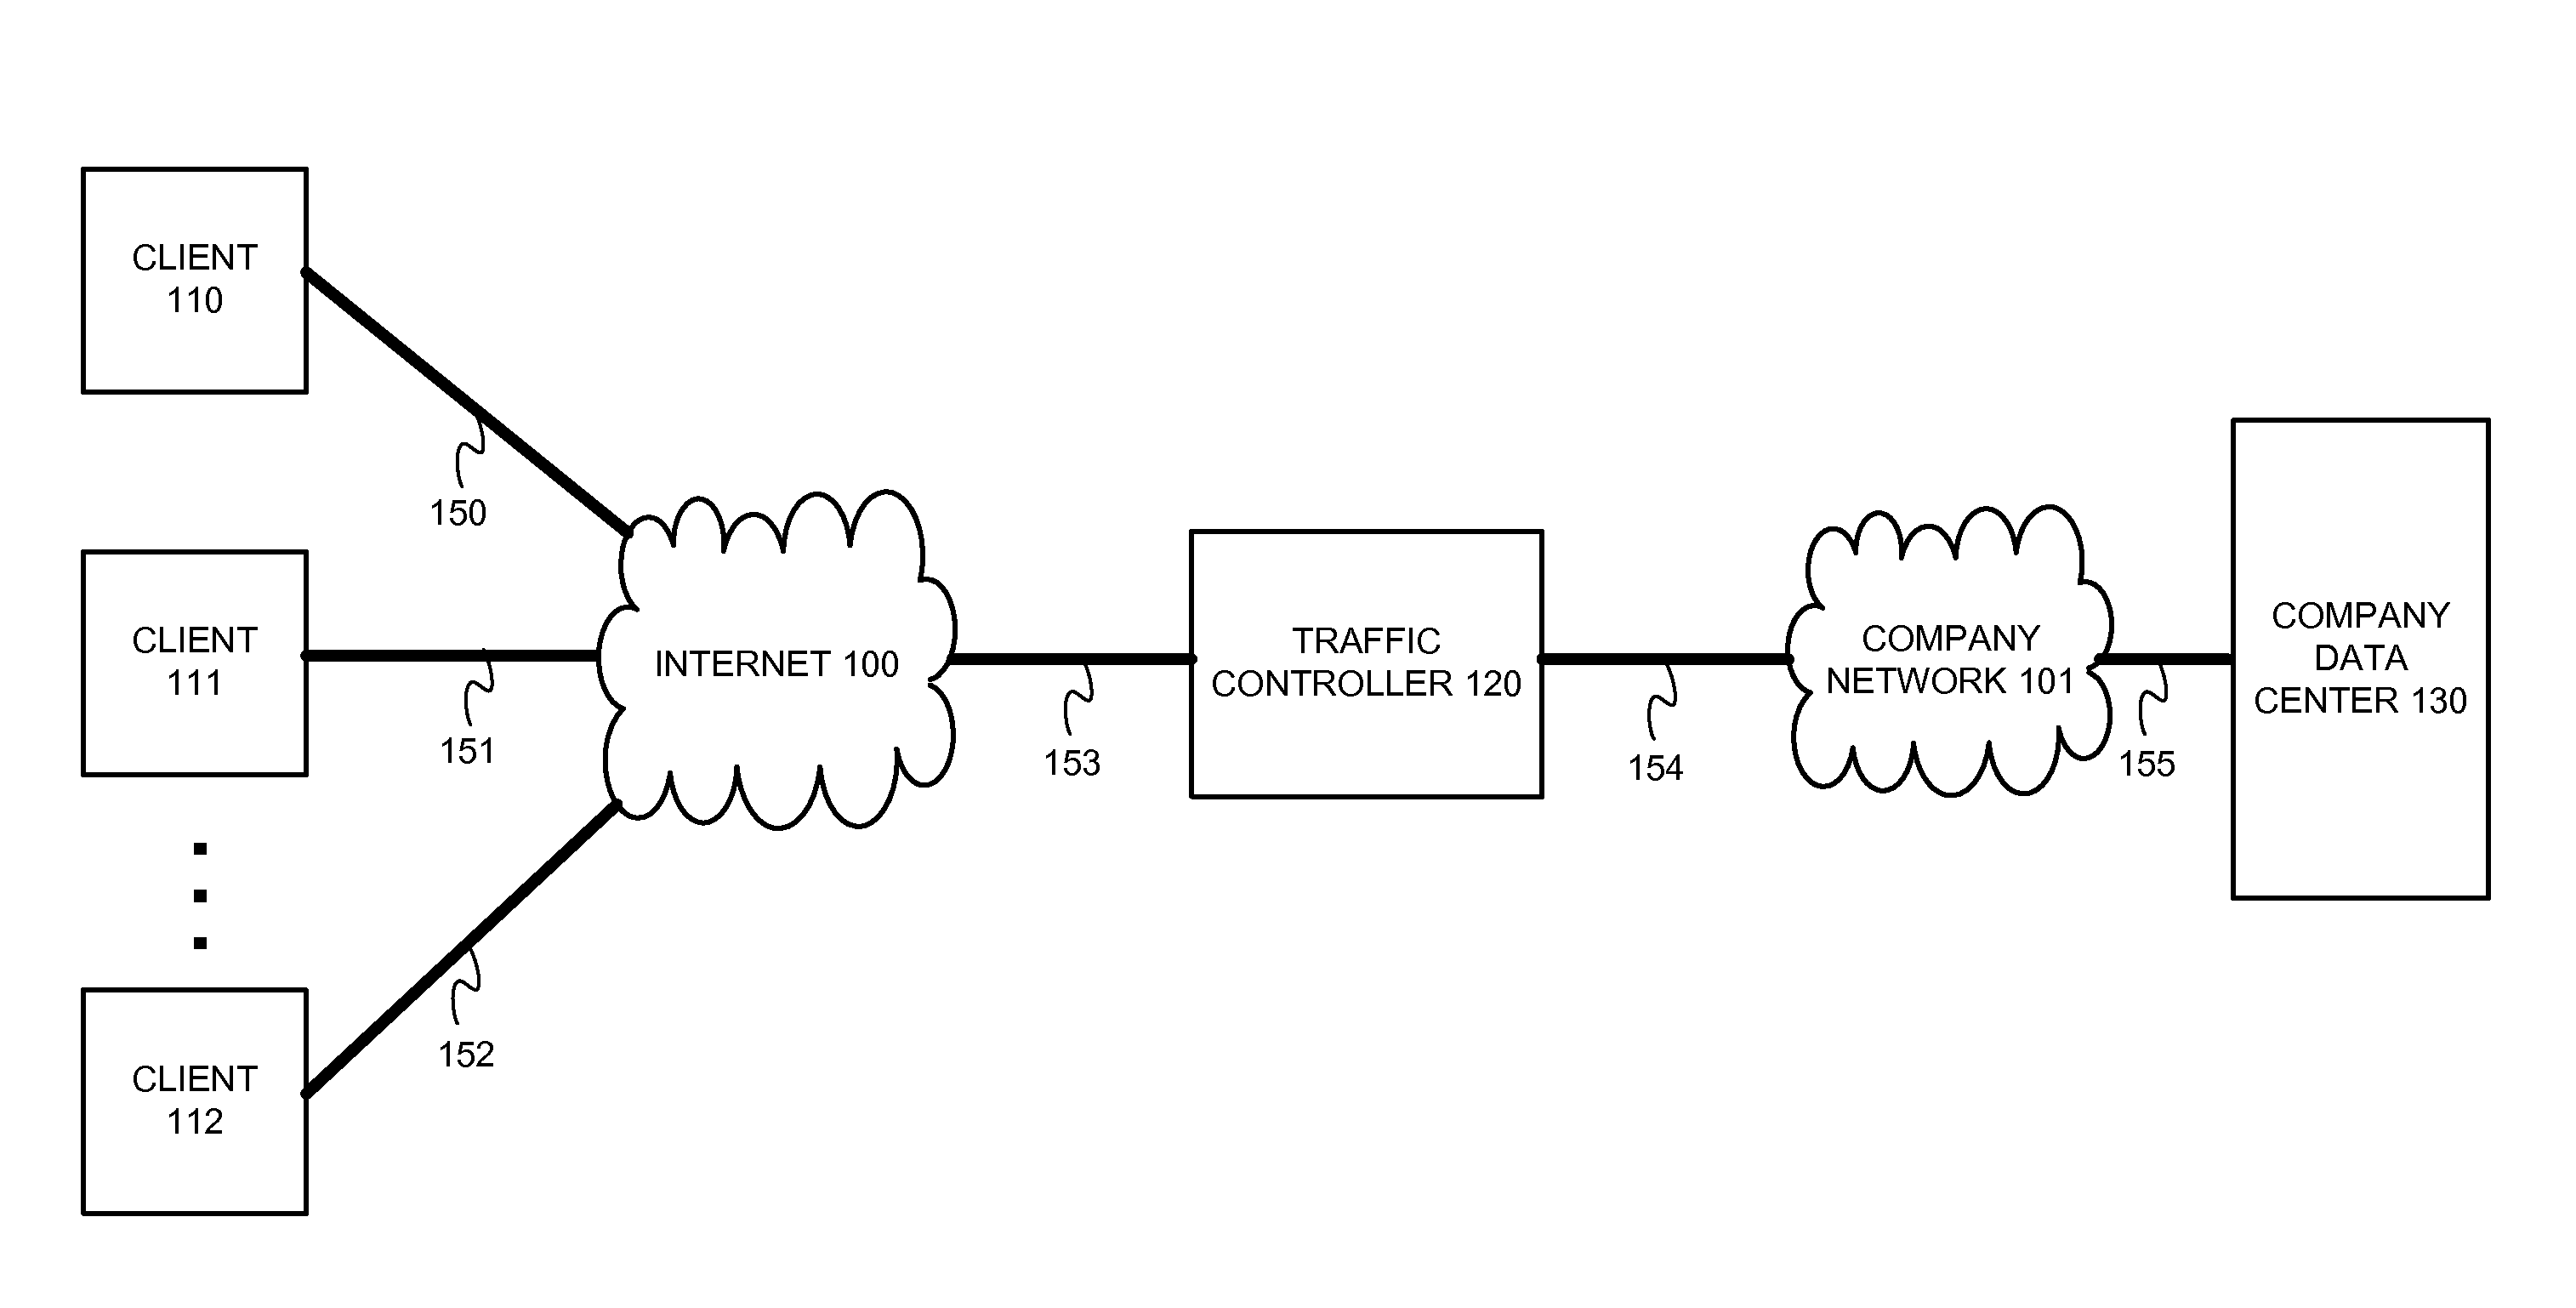 System and Method for Customizing the Identification of Application or Content Type